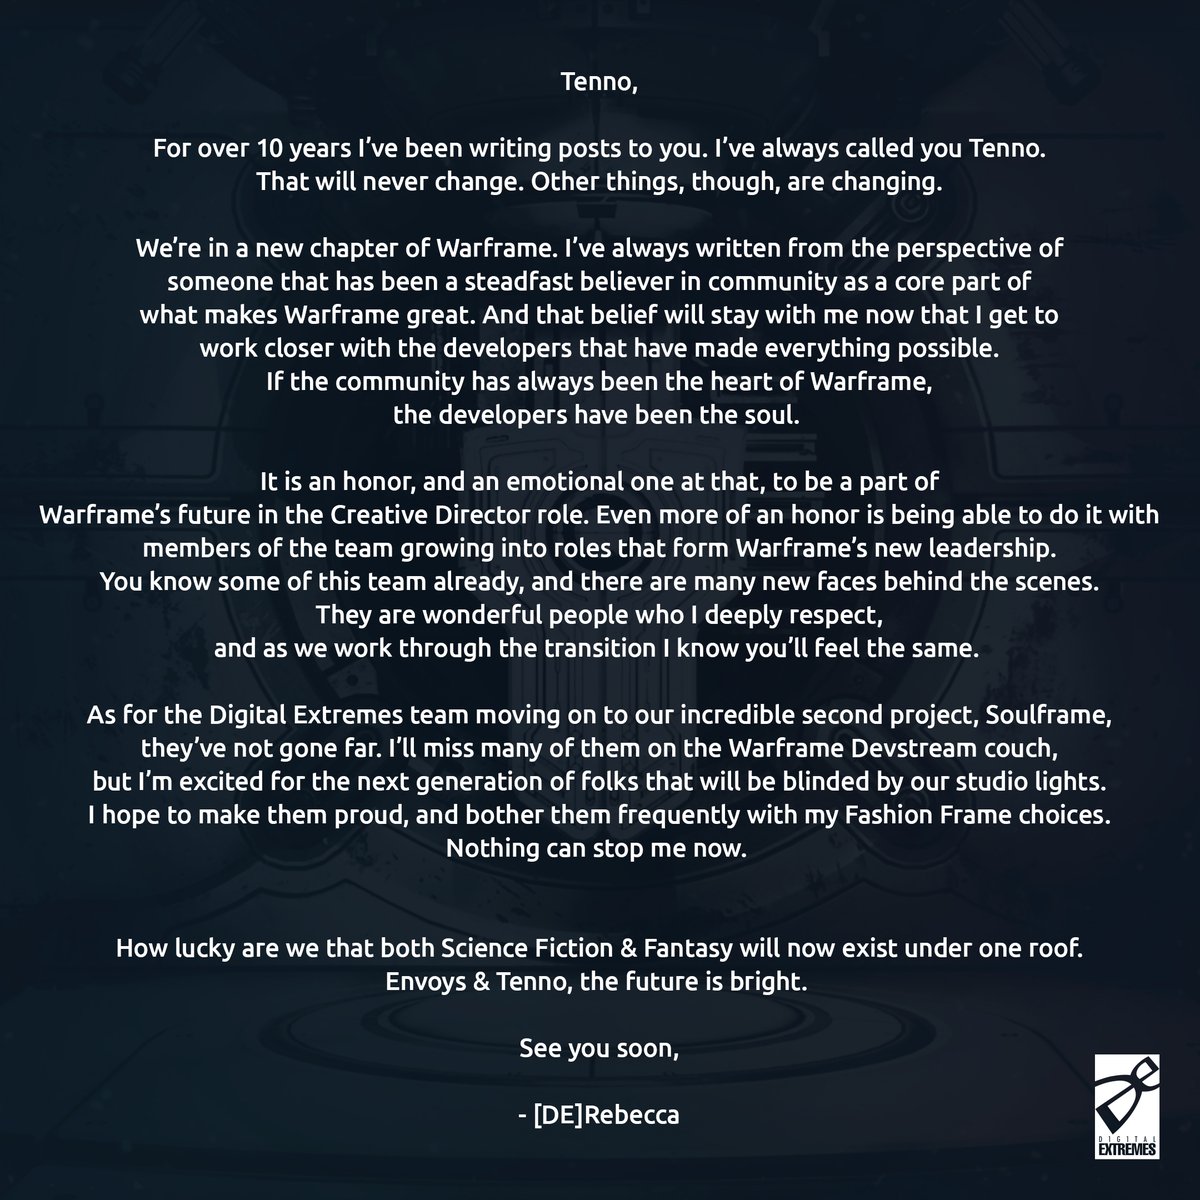 It’s an exciting time for #Warframe as Rebecca Ford transitions to Creative Director while Steve Sinclair and others focus their efforts on a brand new game, #Soulframe. 

We’d like to share a letter from each about the future of #Warframe and more.